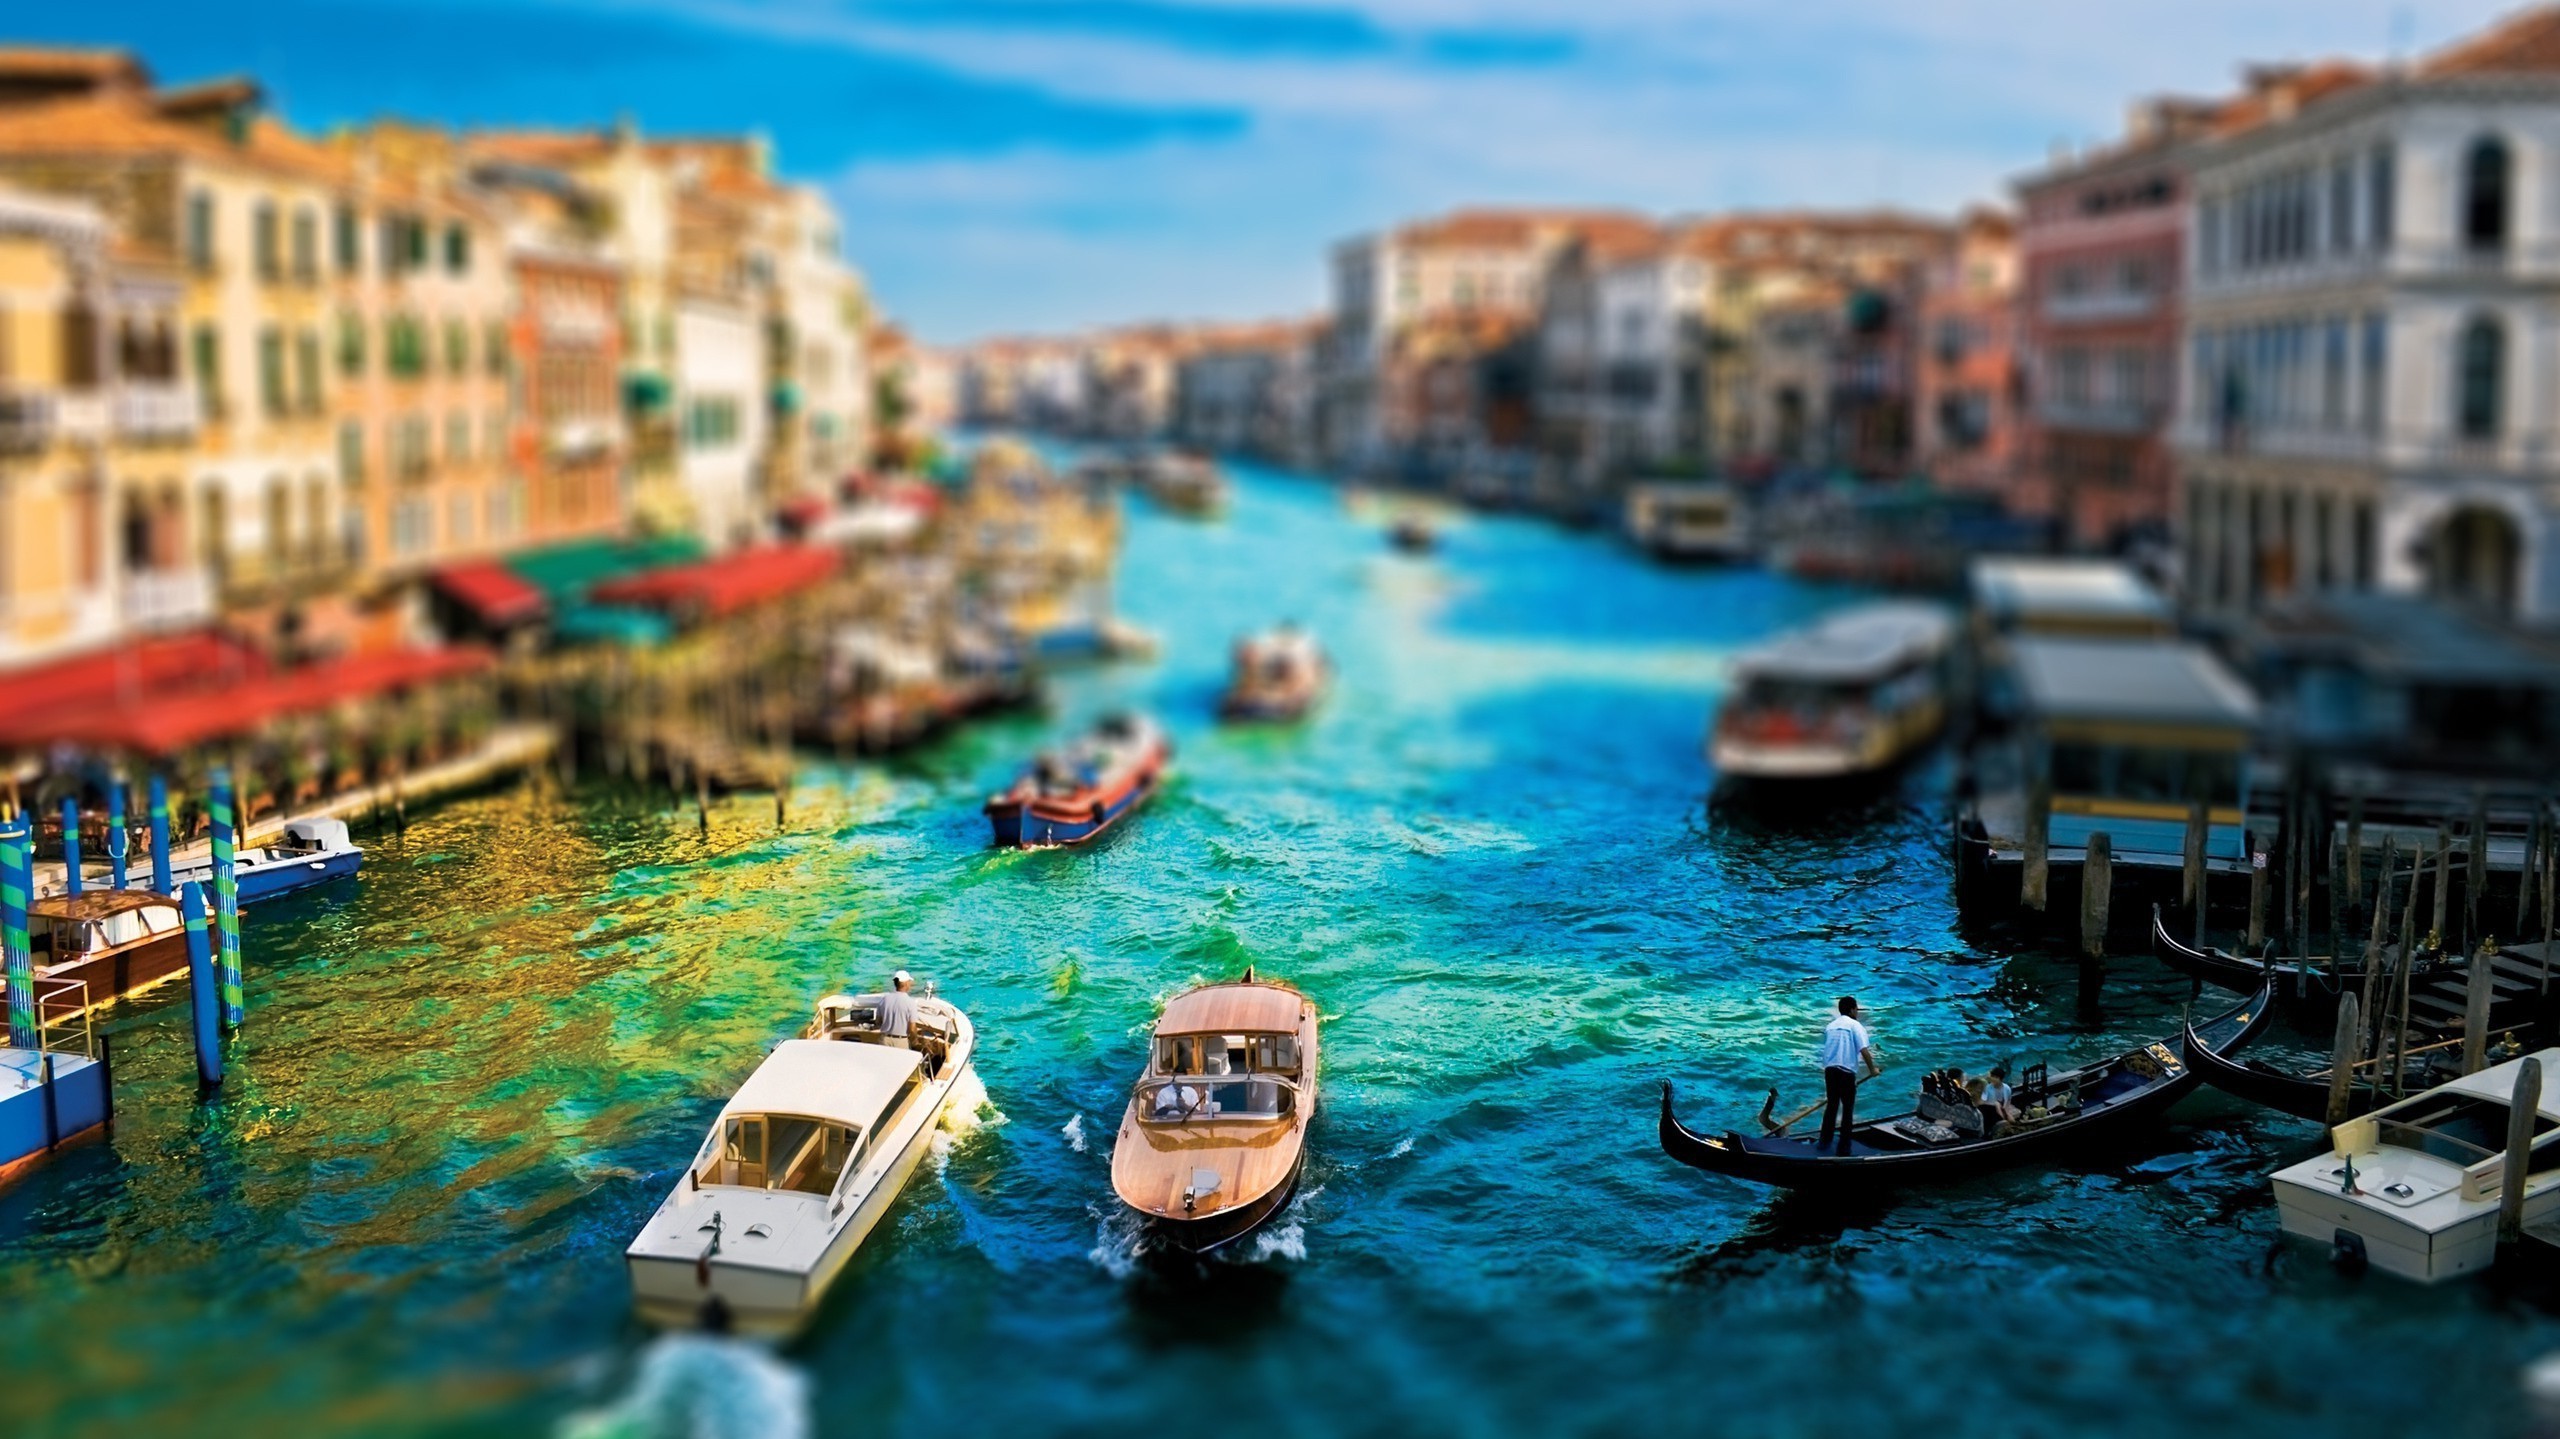 General 2560x1439 photography water Venice Italy tilt shift